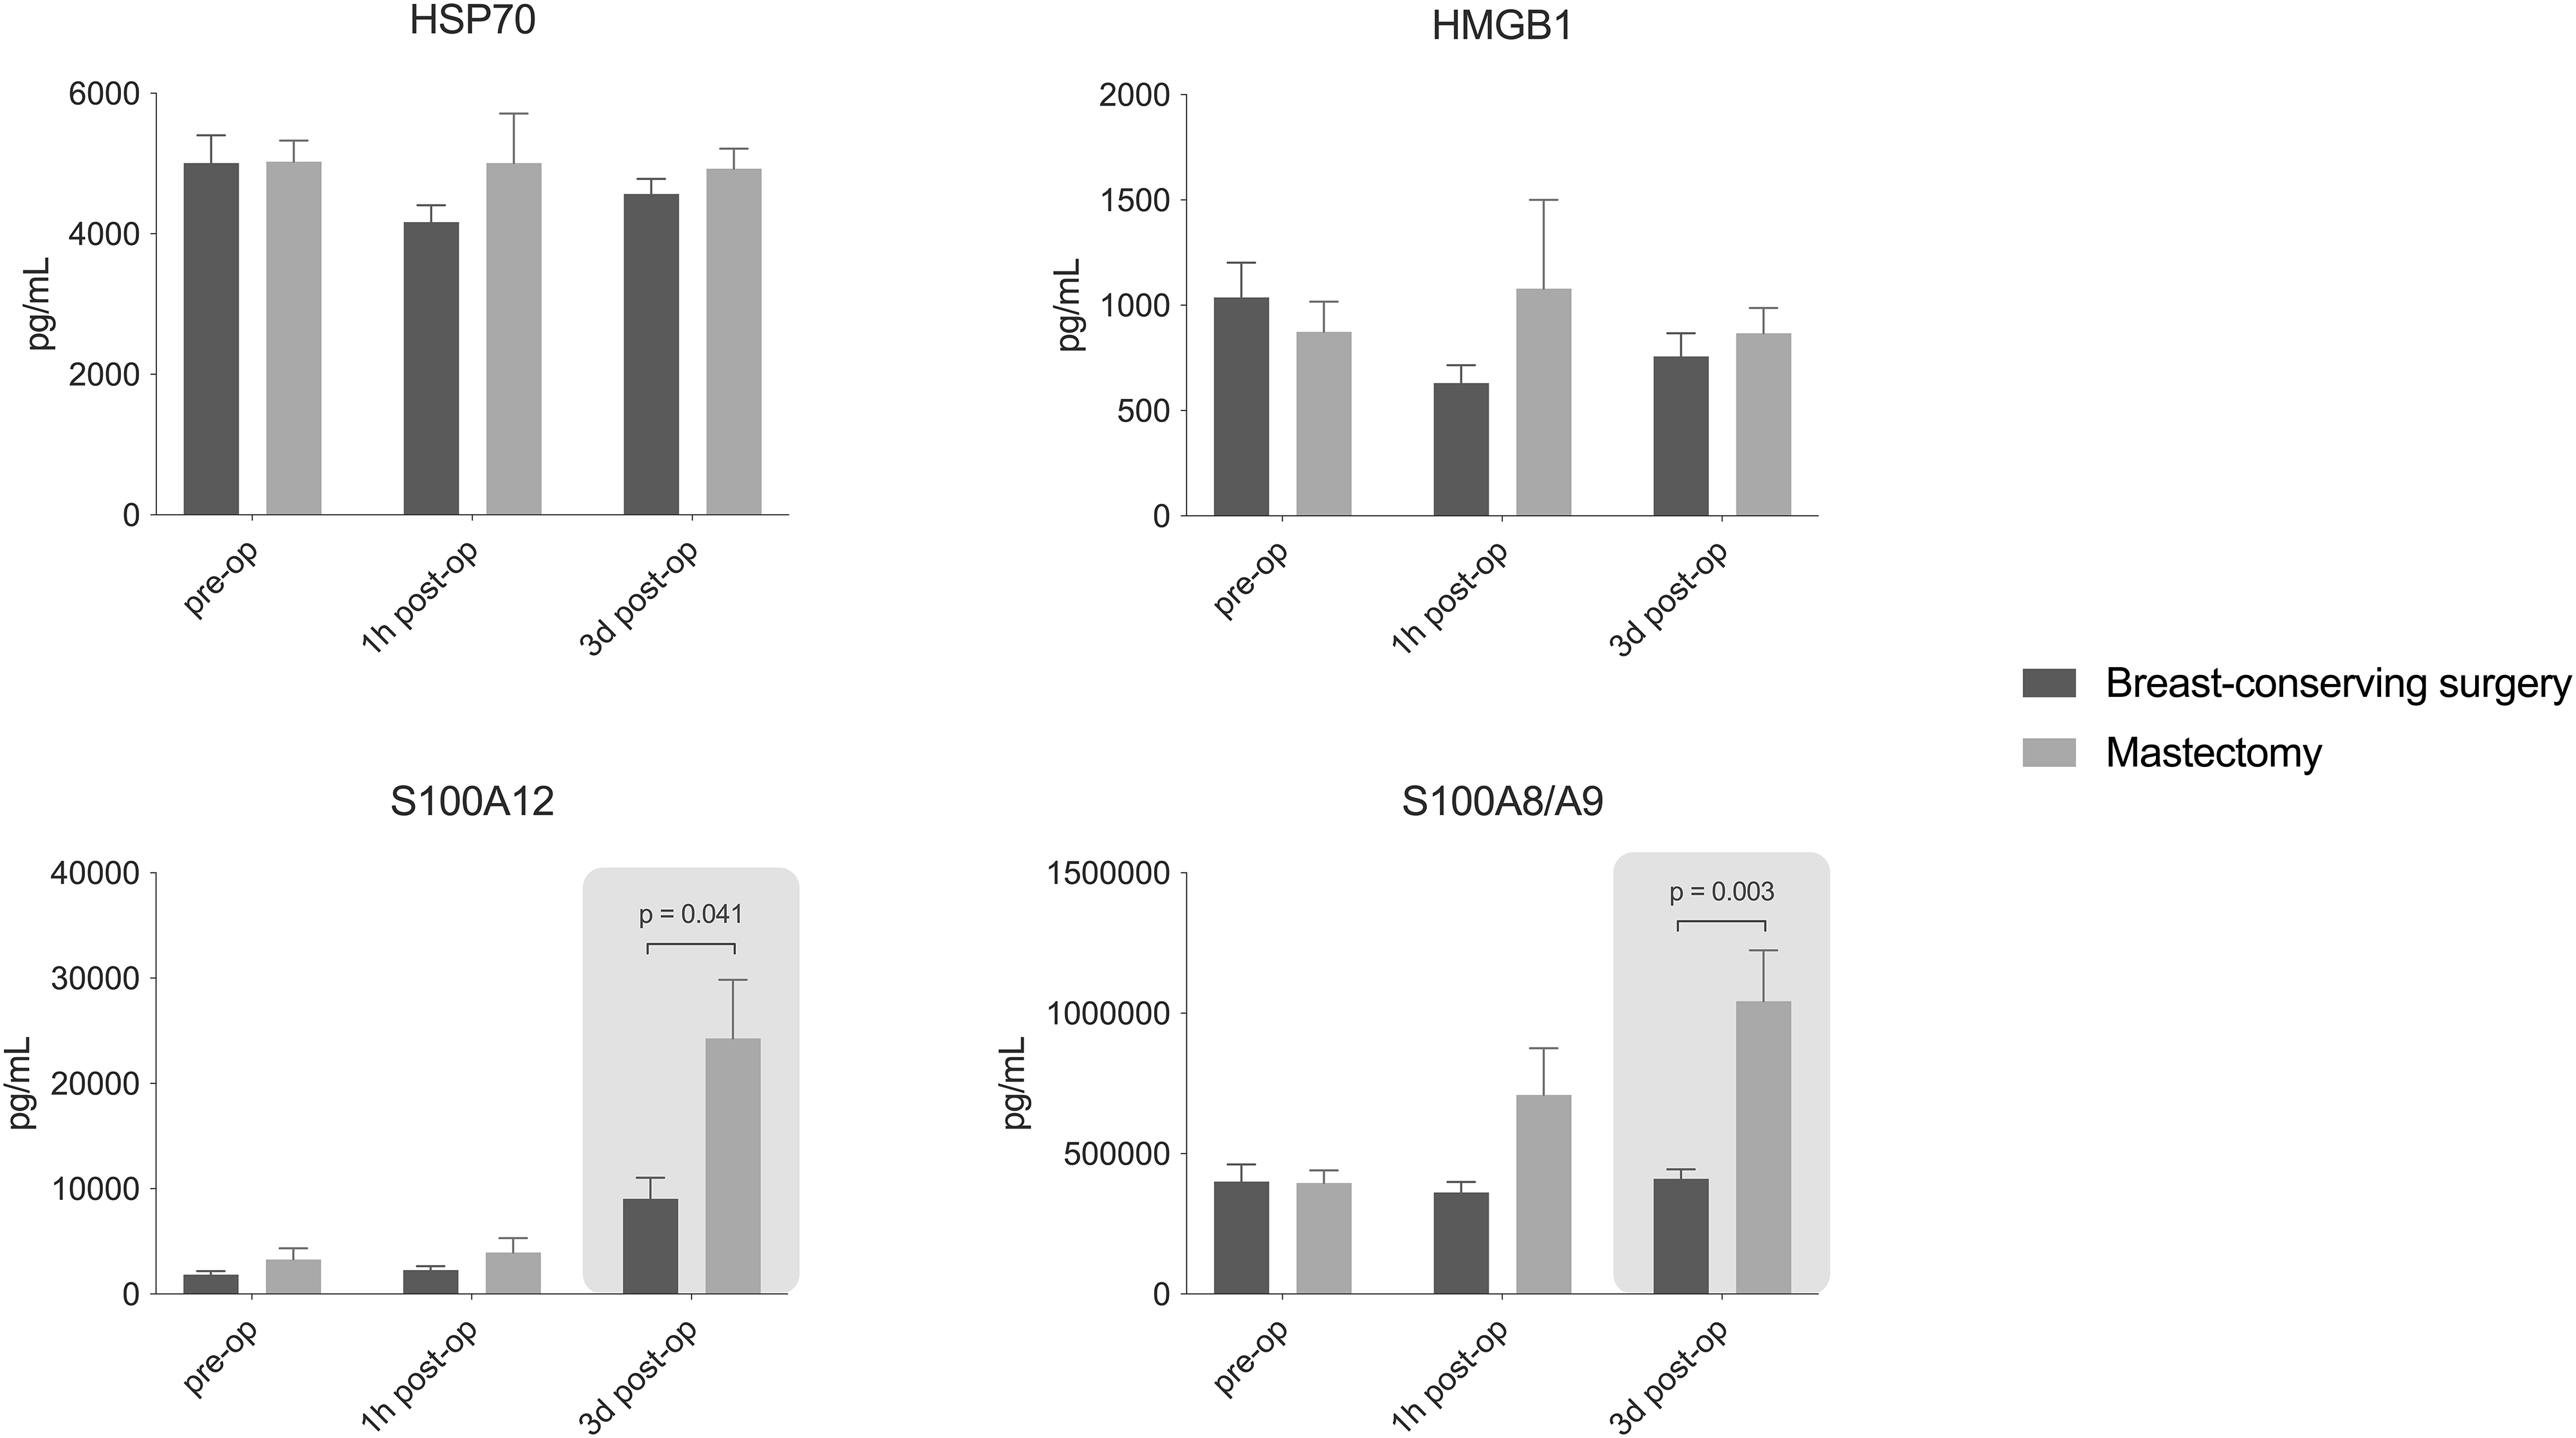 The role of surgical tissue injury and intraoperative sympathetic activation in postoperative immunosuppression after breast-conserving surgery versus mastectomy: a prospective observational study